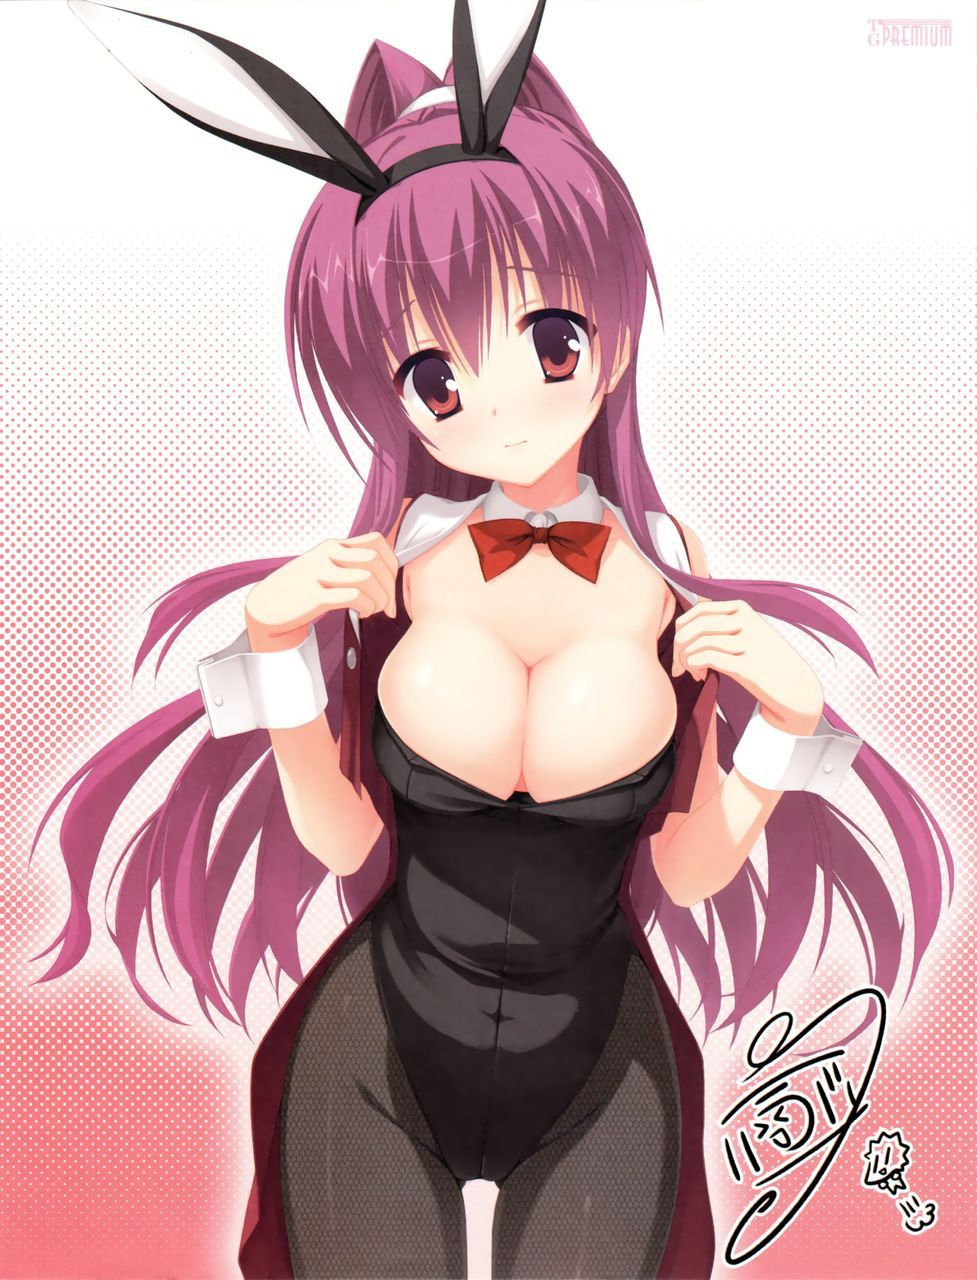 The image that the doh of the bunny girl is erotic 4